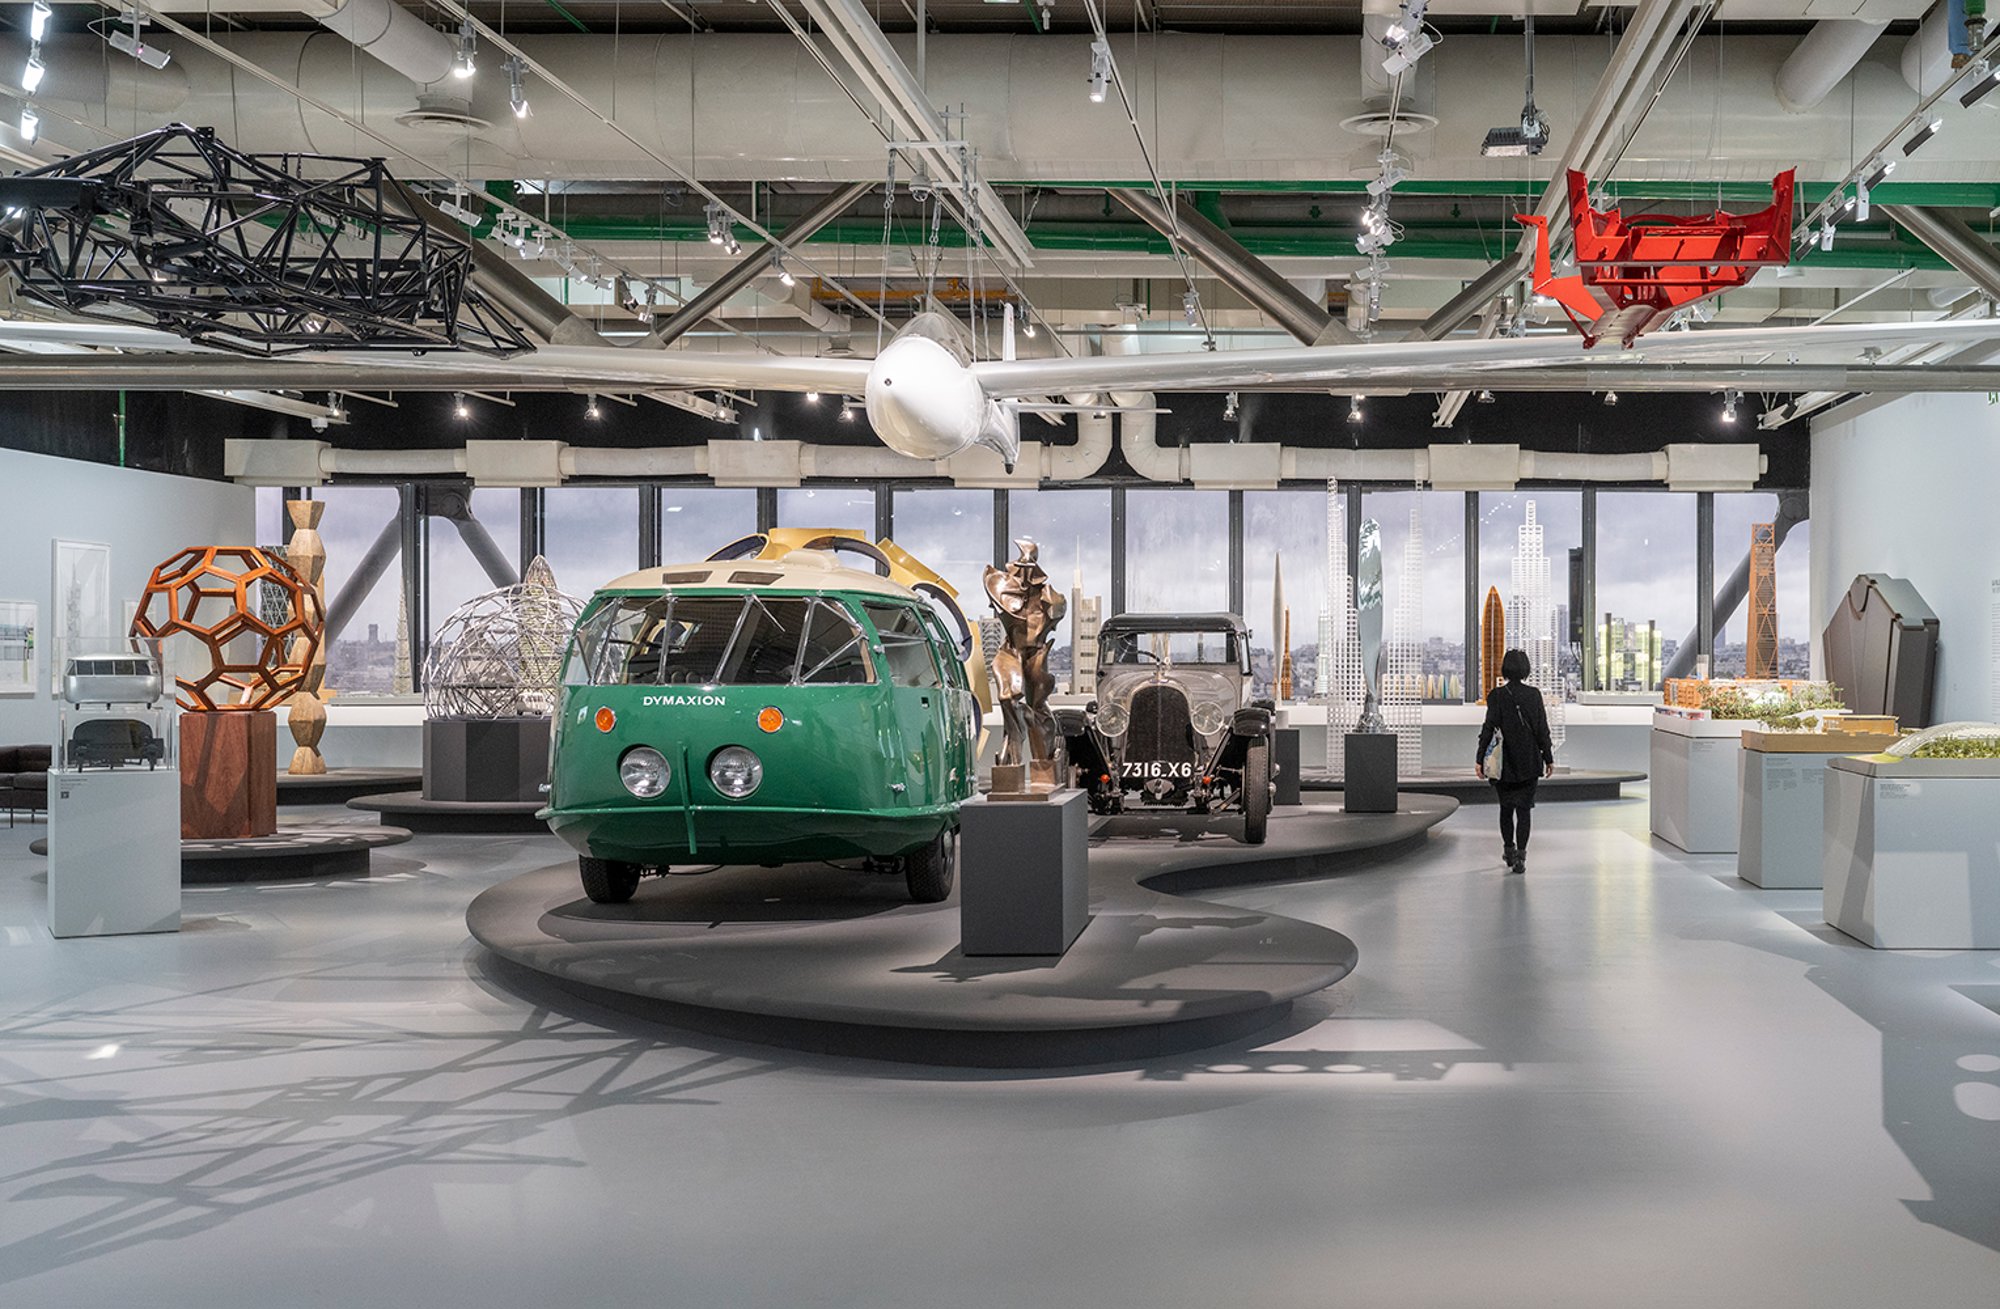 The exhibition includes the machines, vehicles, aircraft, sculptures and paintings that have inspired Norman Fosters' work. 'Skin and Bones' and 'The Vertical City' are set against the backdrop of the city.